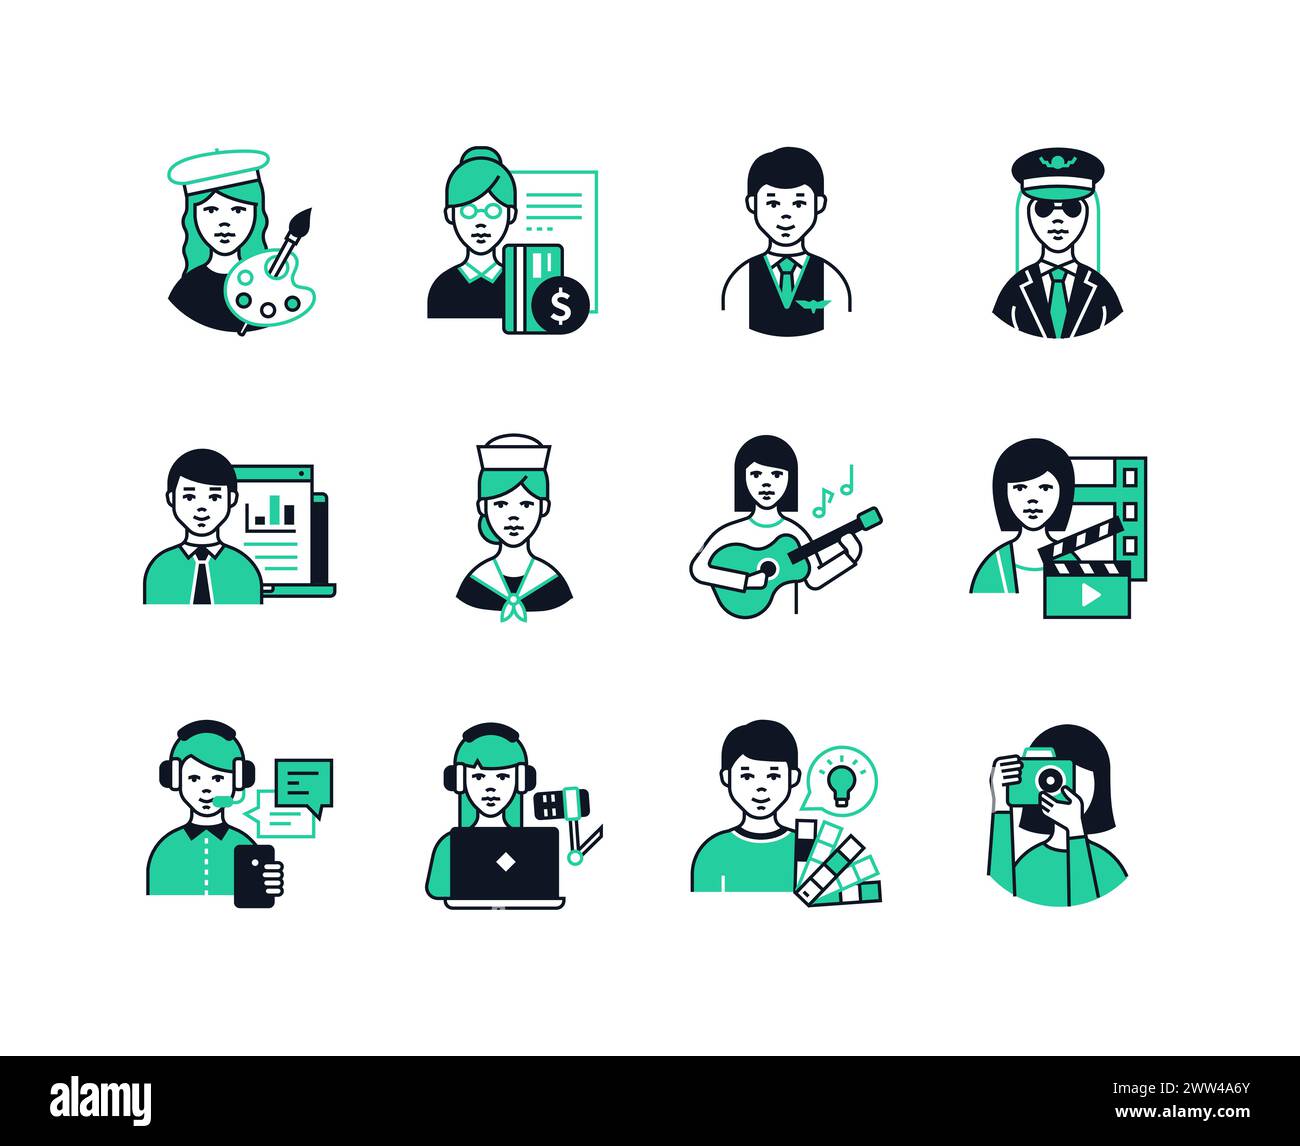 Professions for women and men - line design style icons set Stock Vector